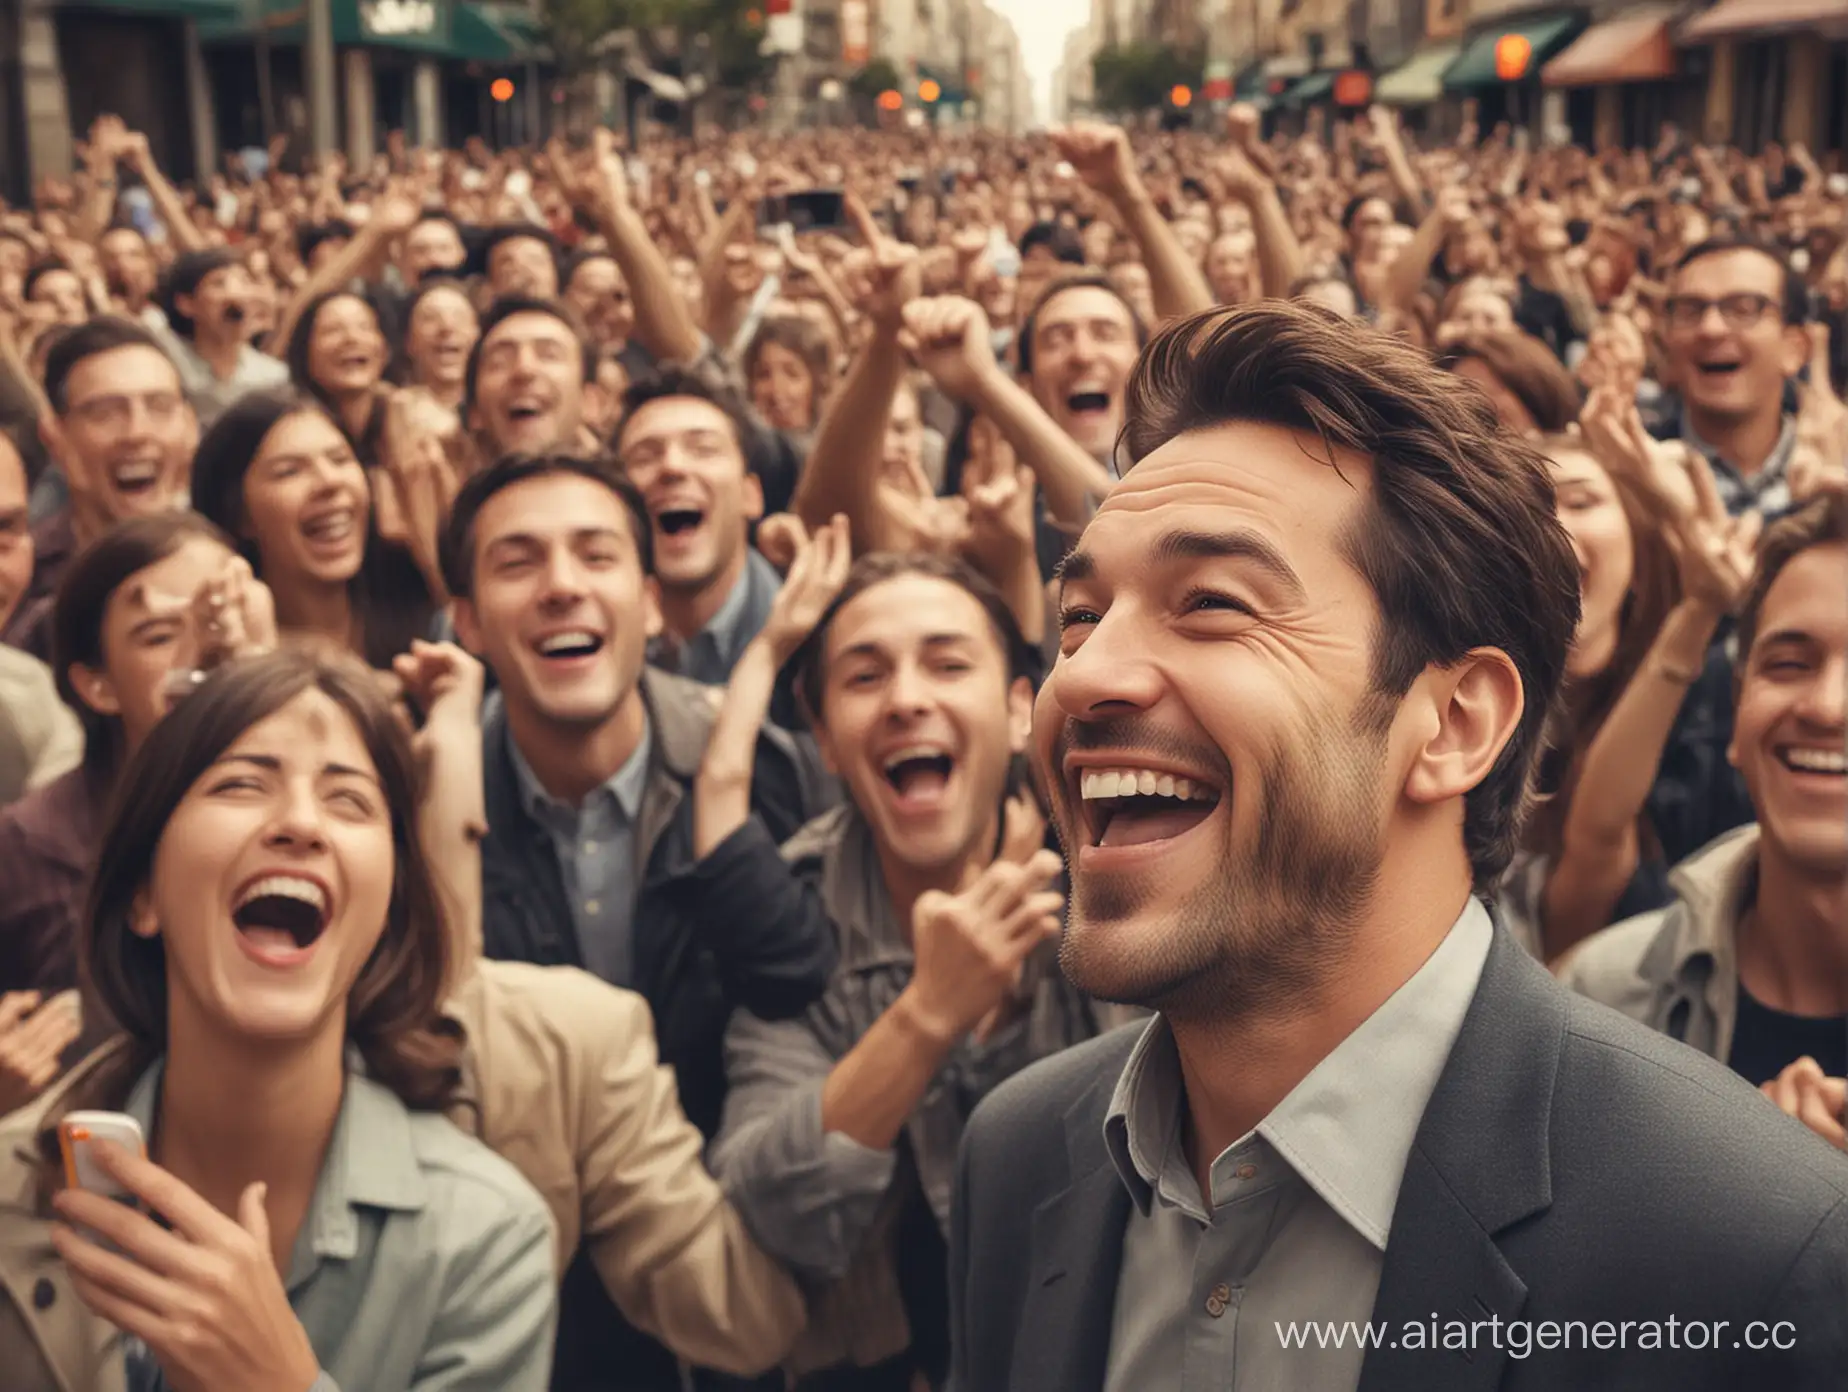 Laughing-Man-Surrounded-by-Joyful-Crowd-Candid-Moment-Photography